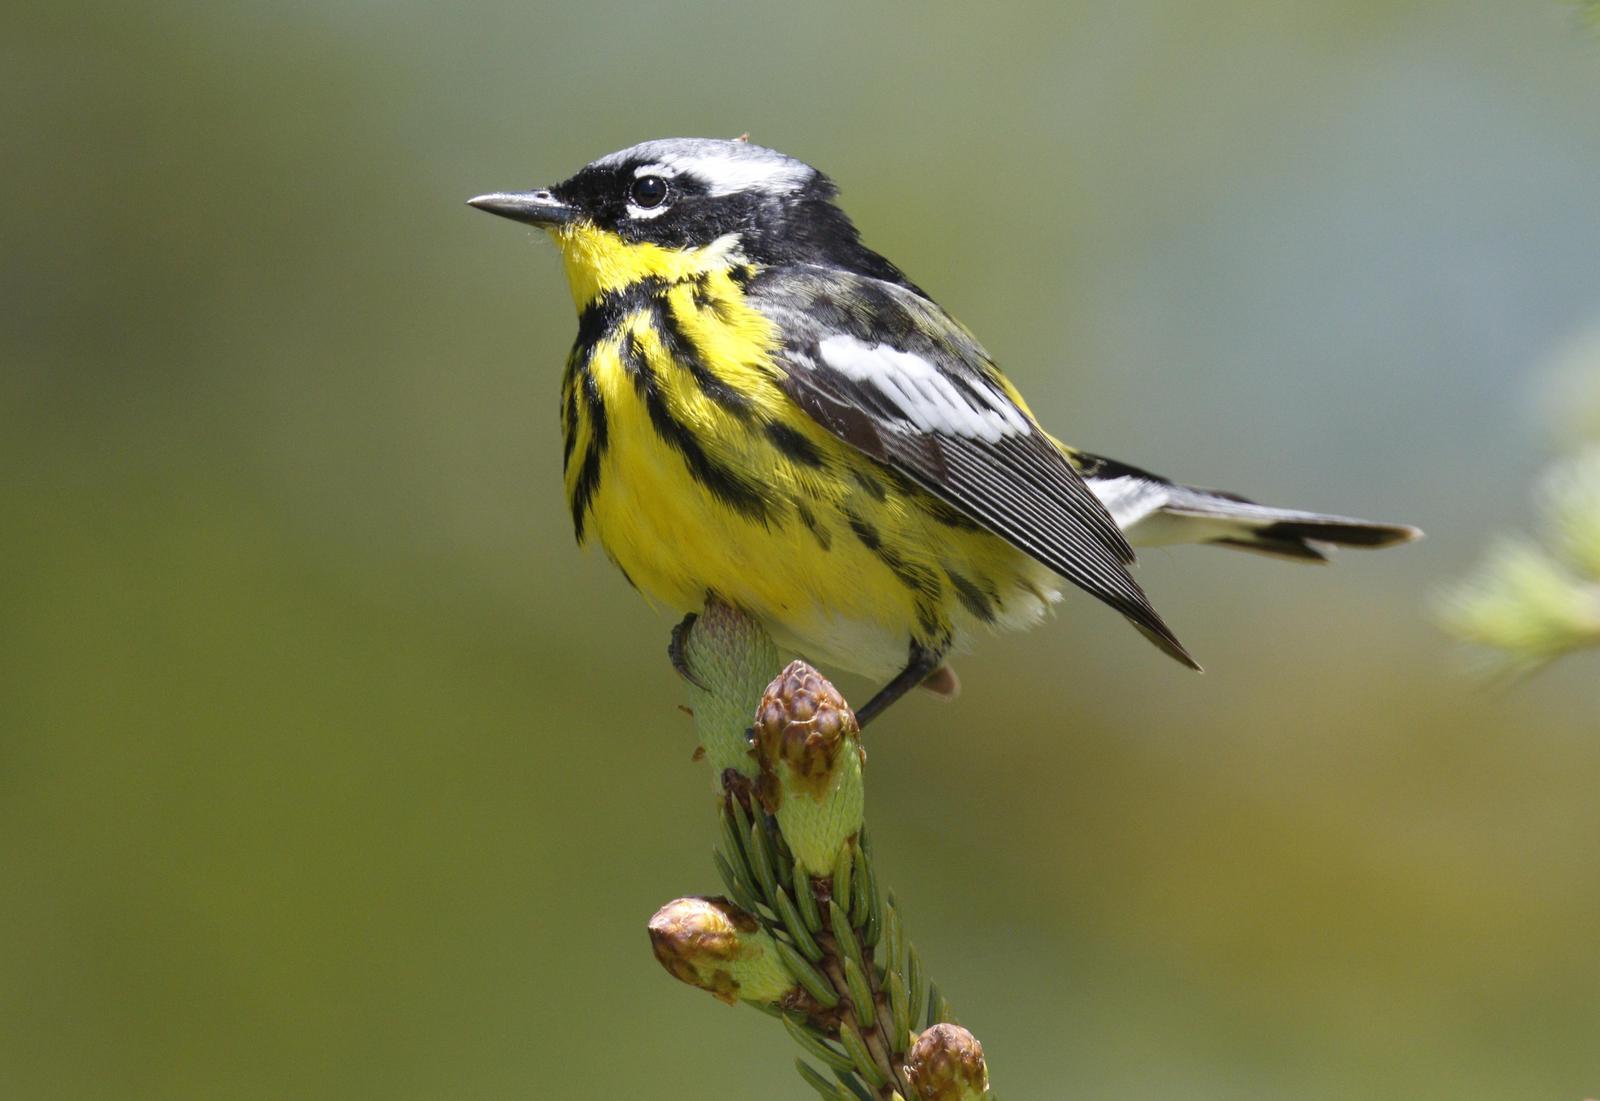 Magnolia Warbler Photo by Emily Willoughby